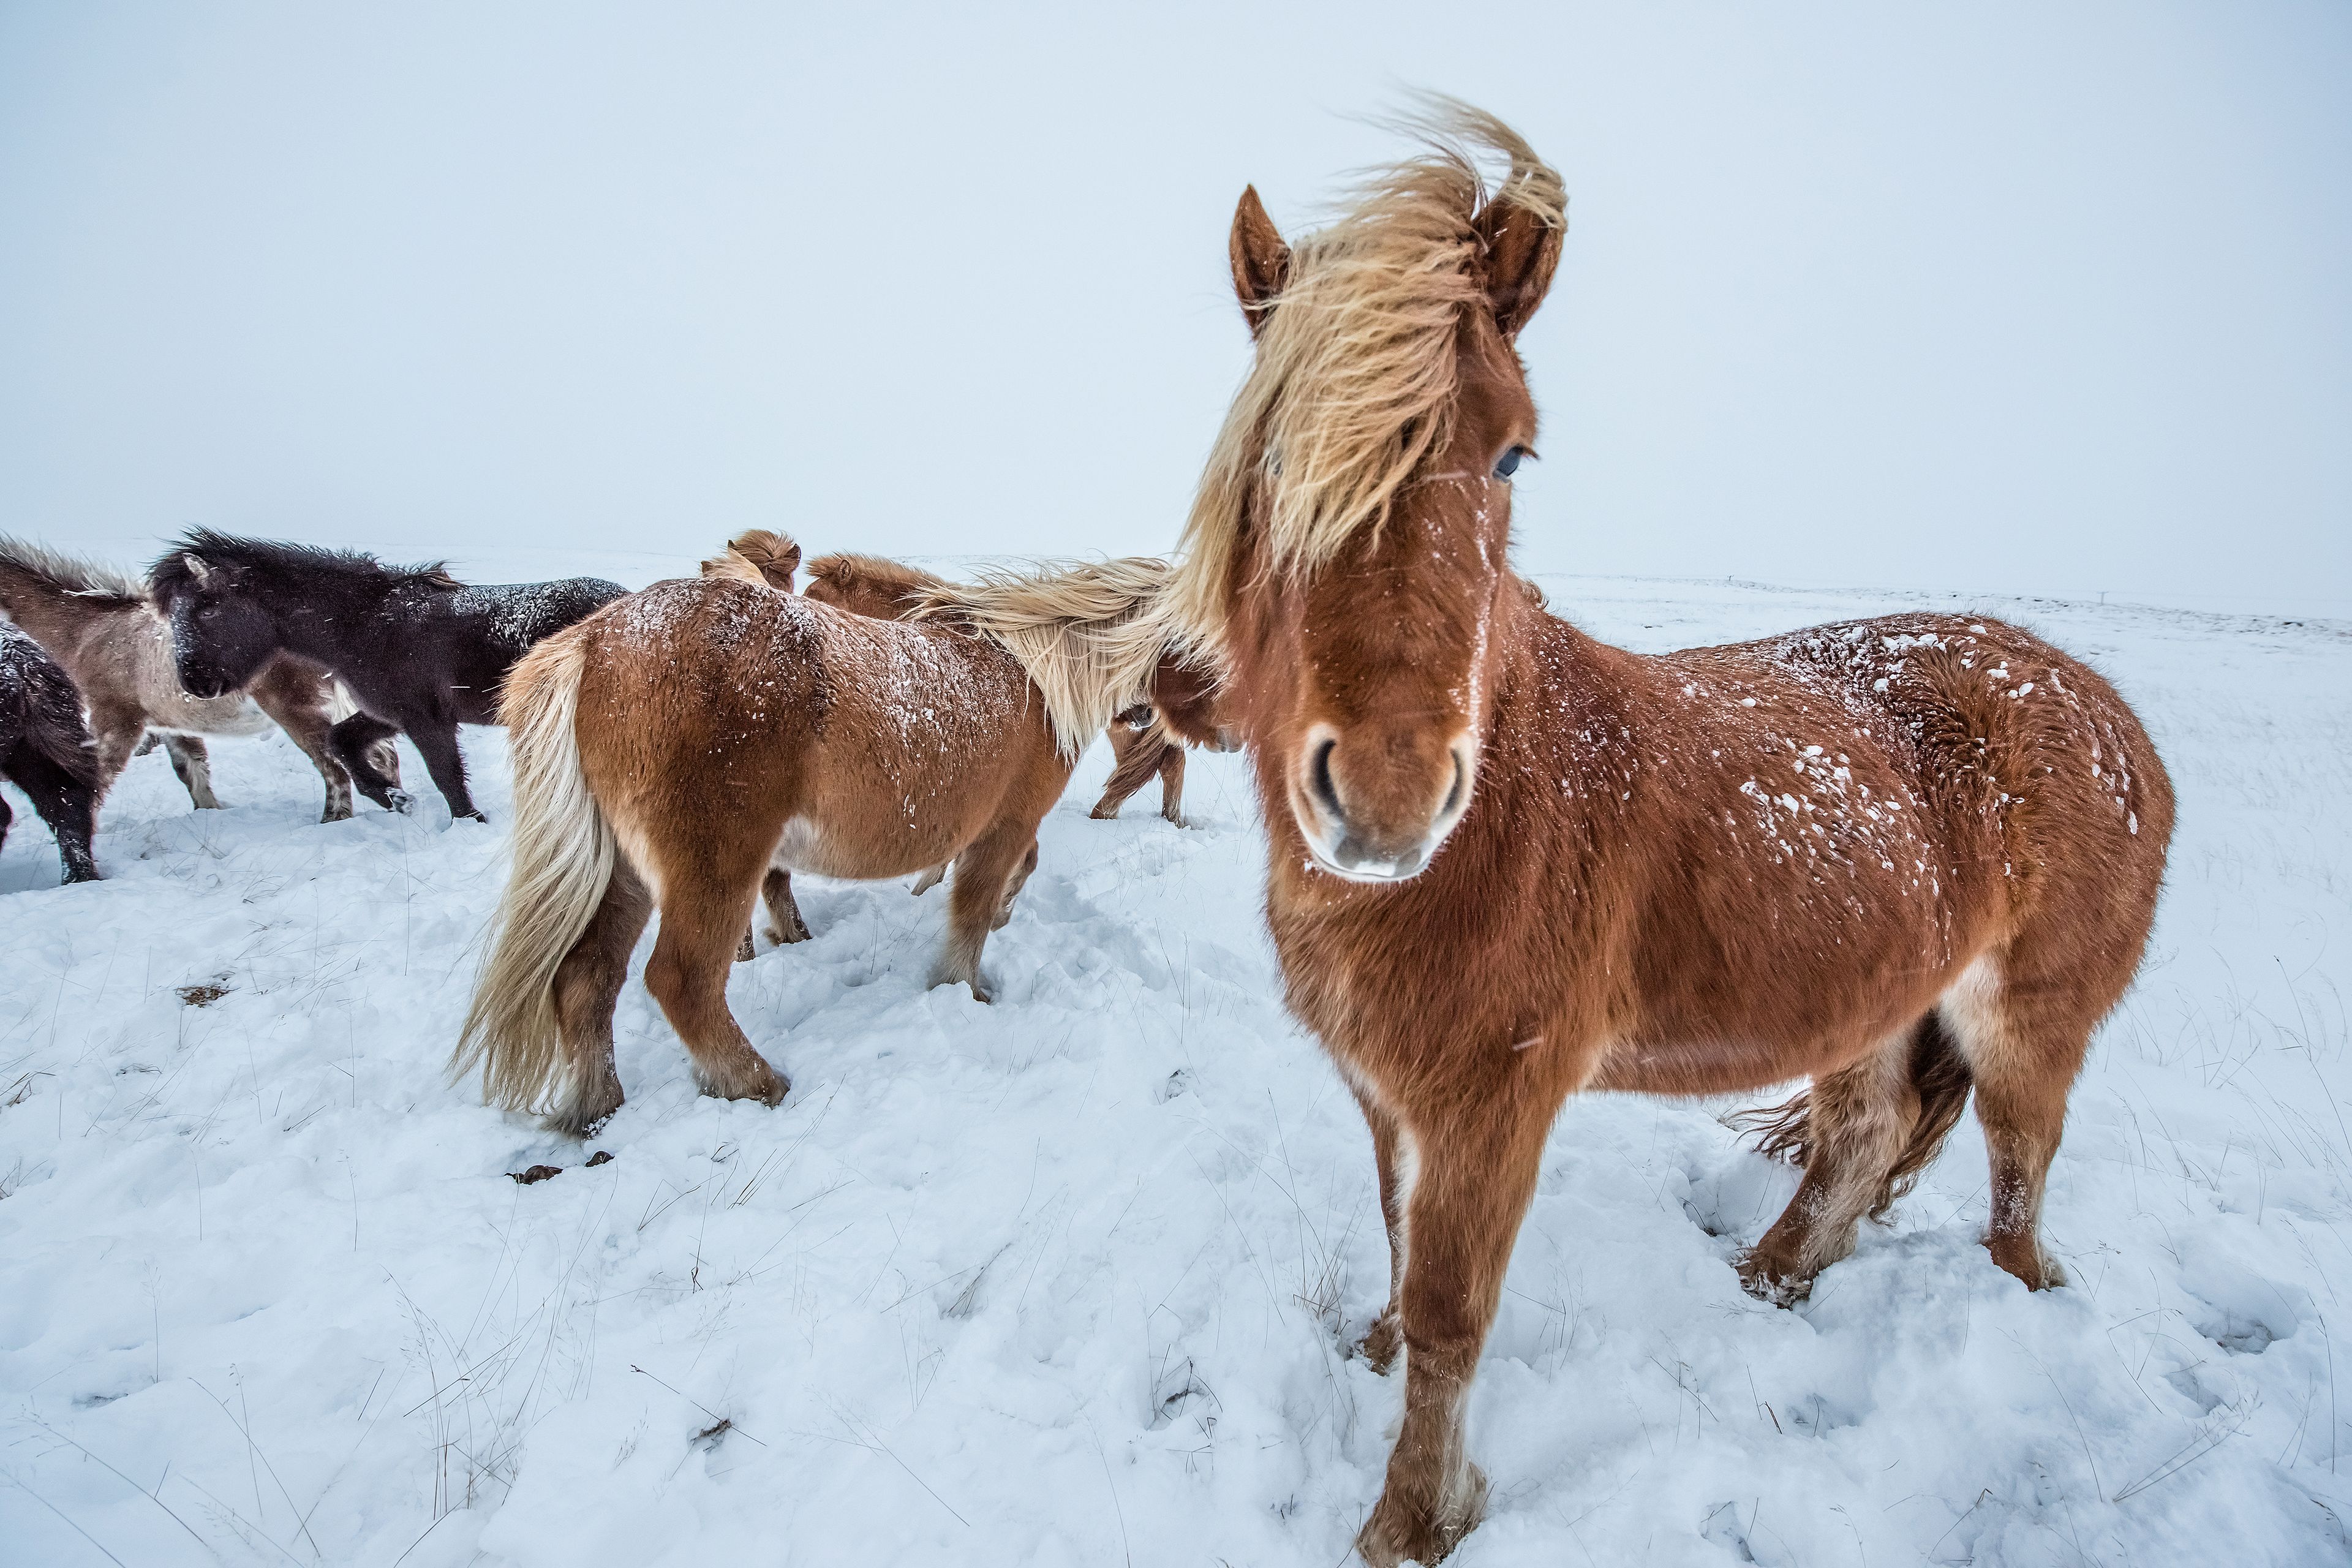 icelandic horse in varying temperatures with wintry landscapes in the background